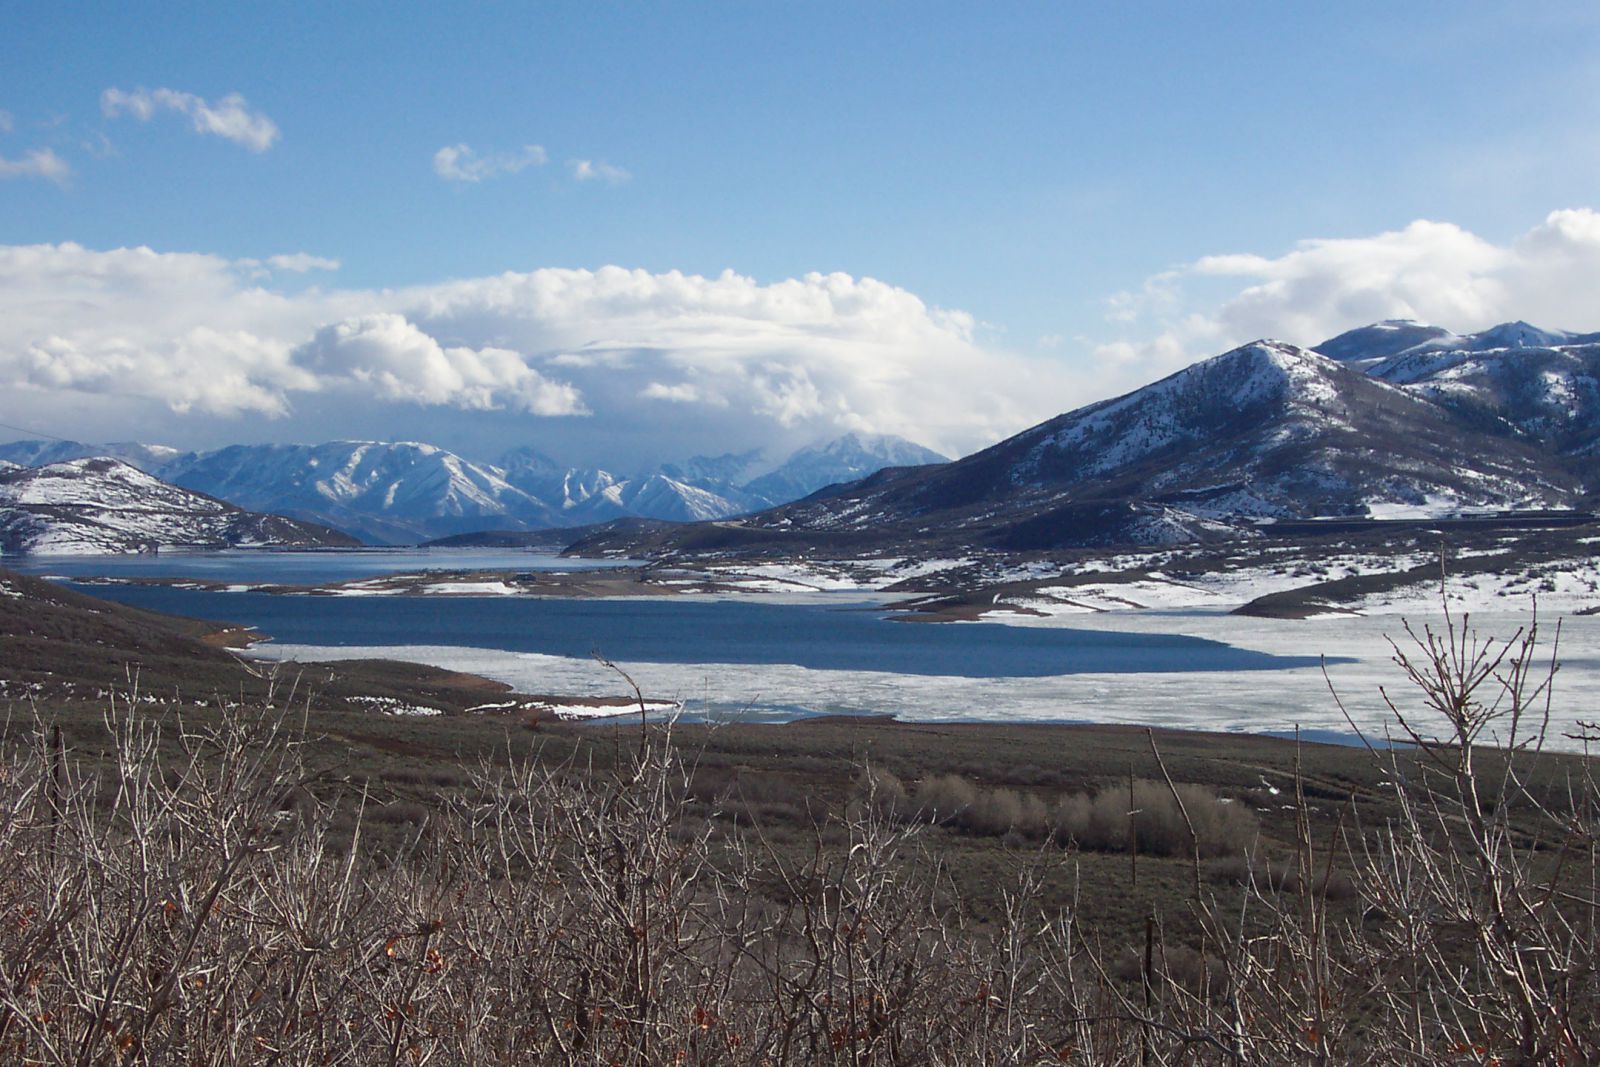 Overlooking the Jordanelle Reservoir with Park City and Deer Valley Ski Mountains in background.